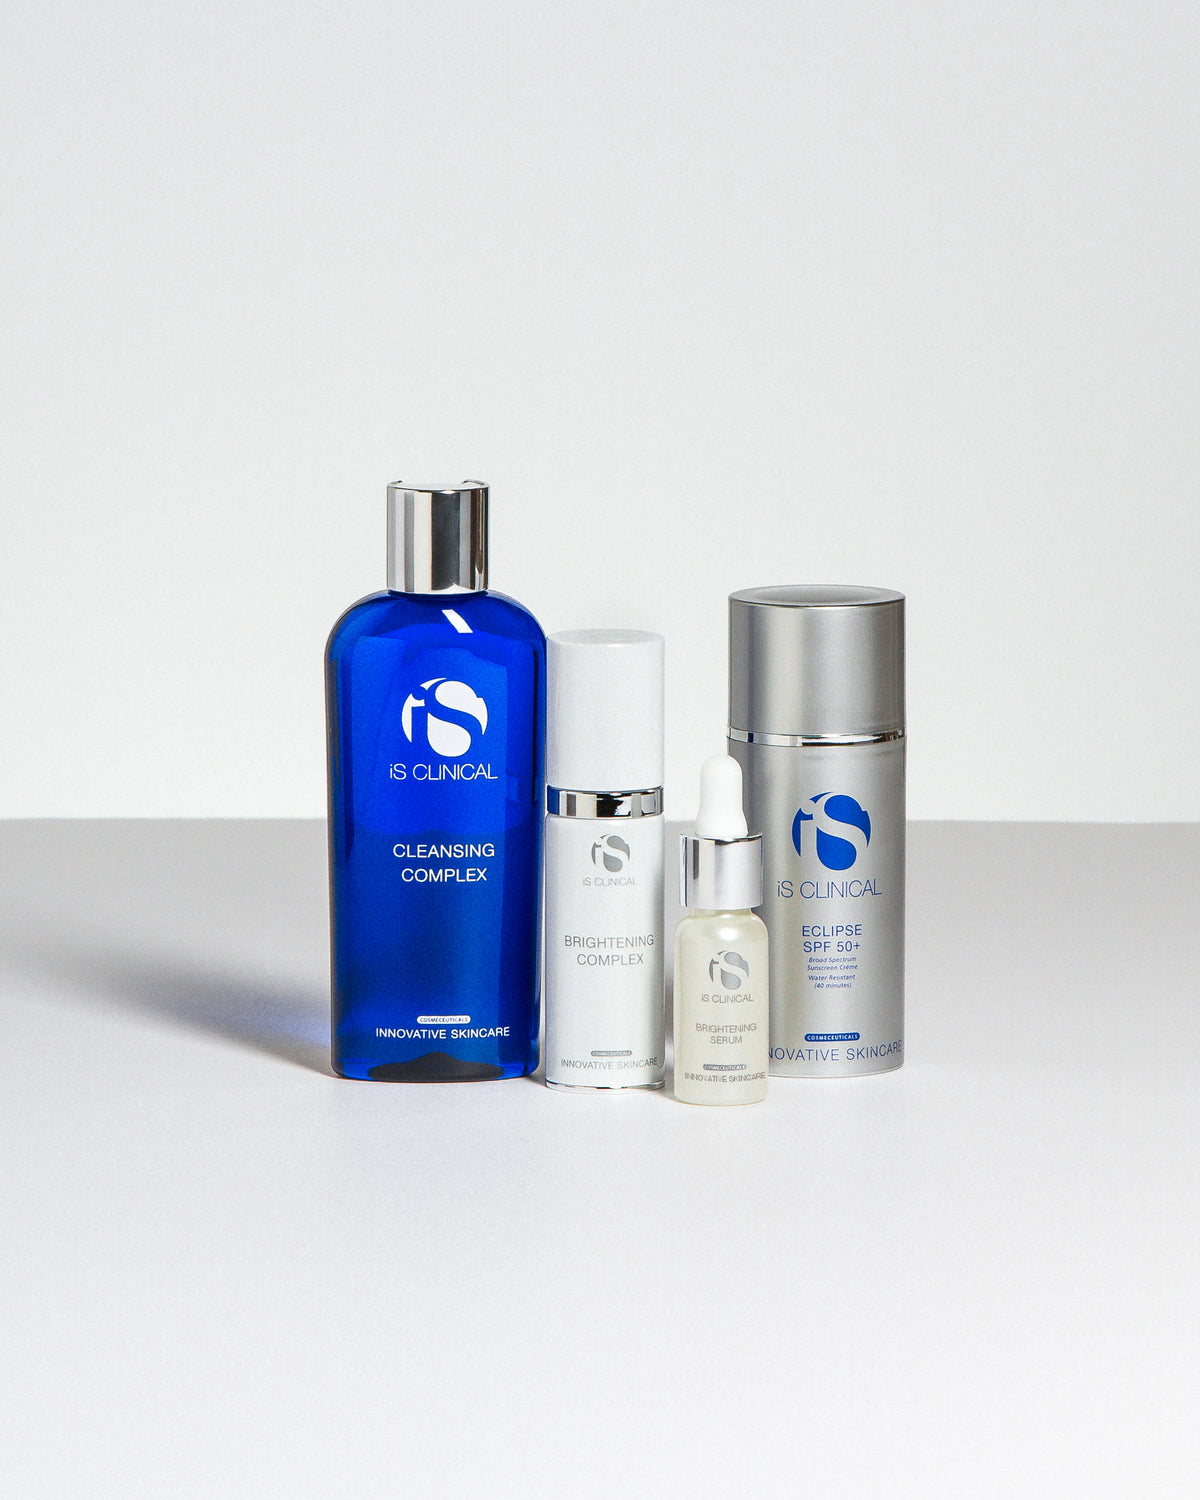 Pure Radiance Collection - iS CLINICAL